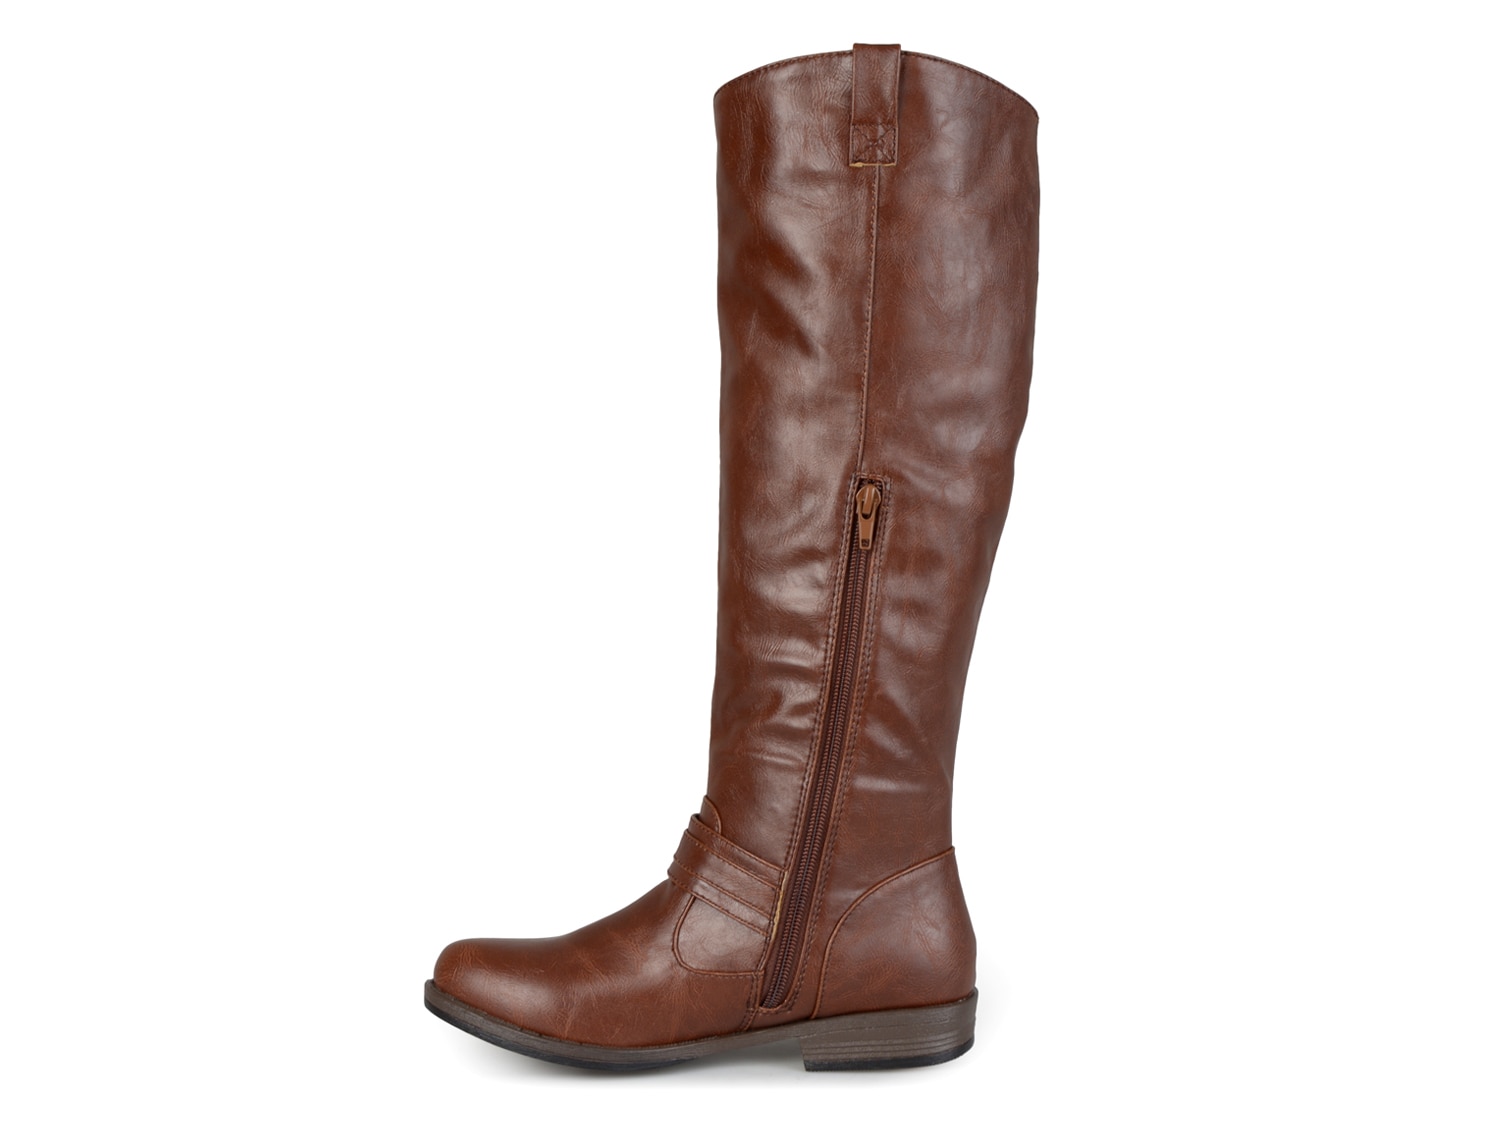 Journee Collection Kai Wide Calf Riding Boot | DSW